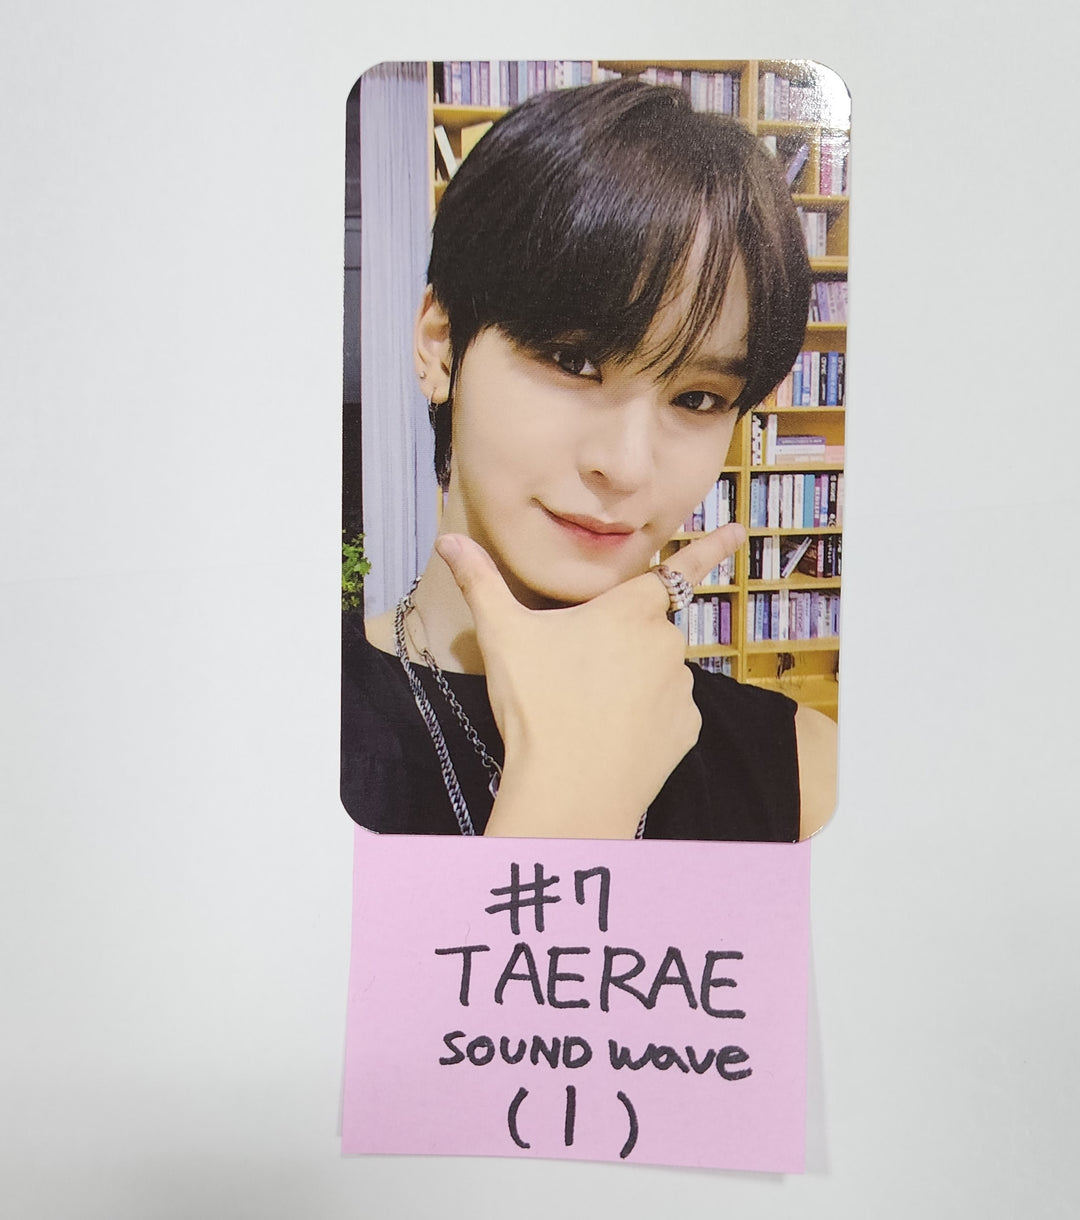 TEMPEST "SHINING UP" - Soundwave Fansign Event Photocard Round 2